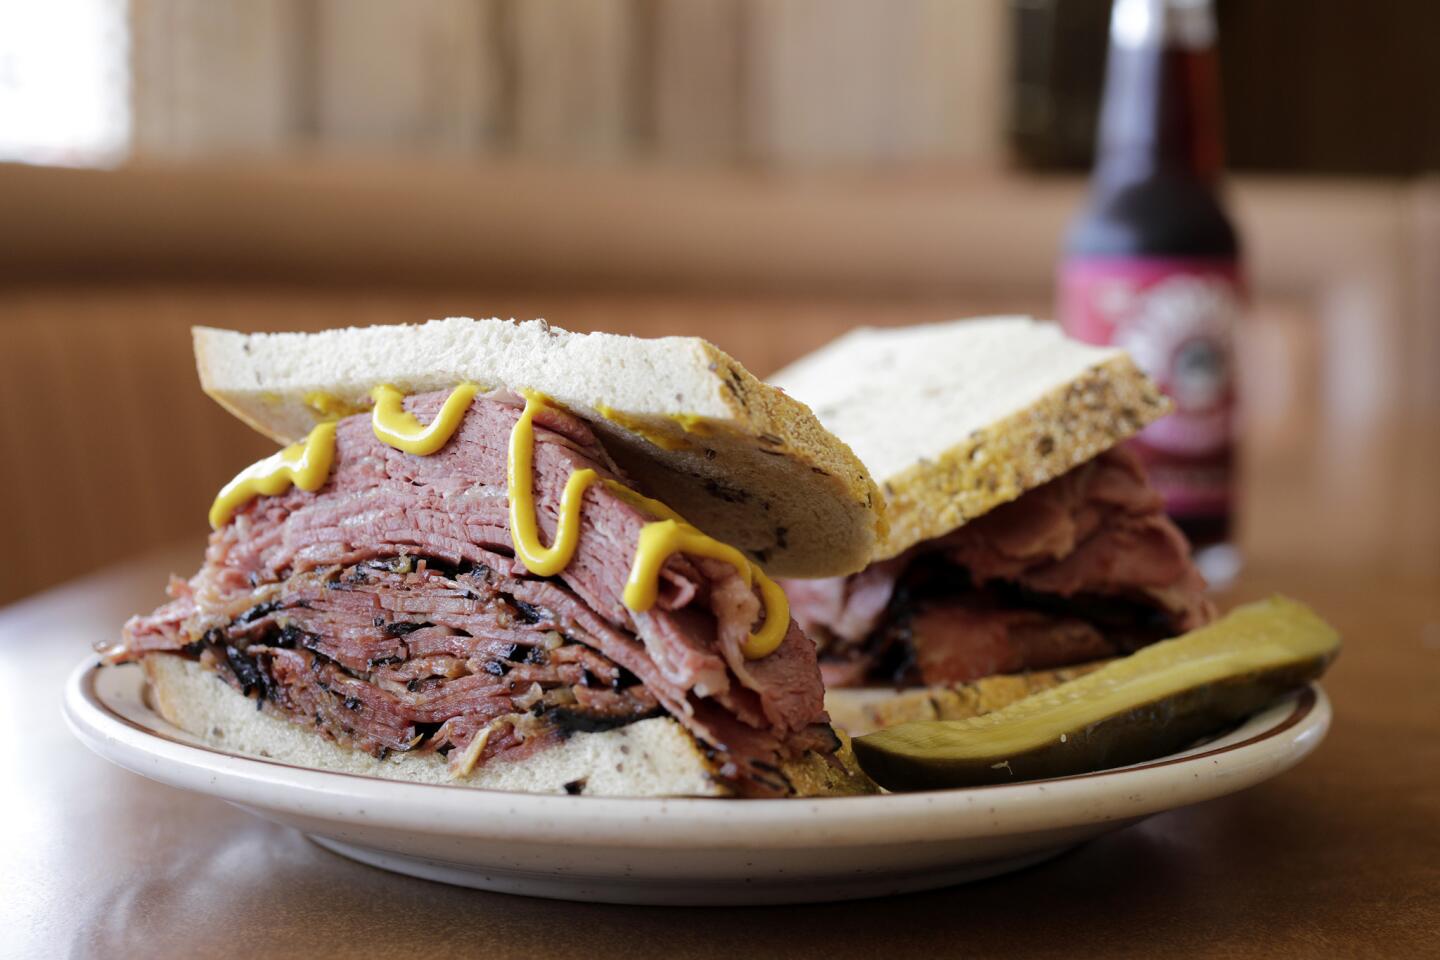 Canter's Fairfax Sandwich features hot corned beef and pastrami on rye bread with a choice of cole slaw or potato salad. The family-owned Canter's has been an L.A. institution for decades.